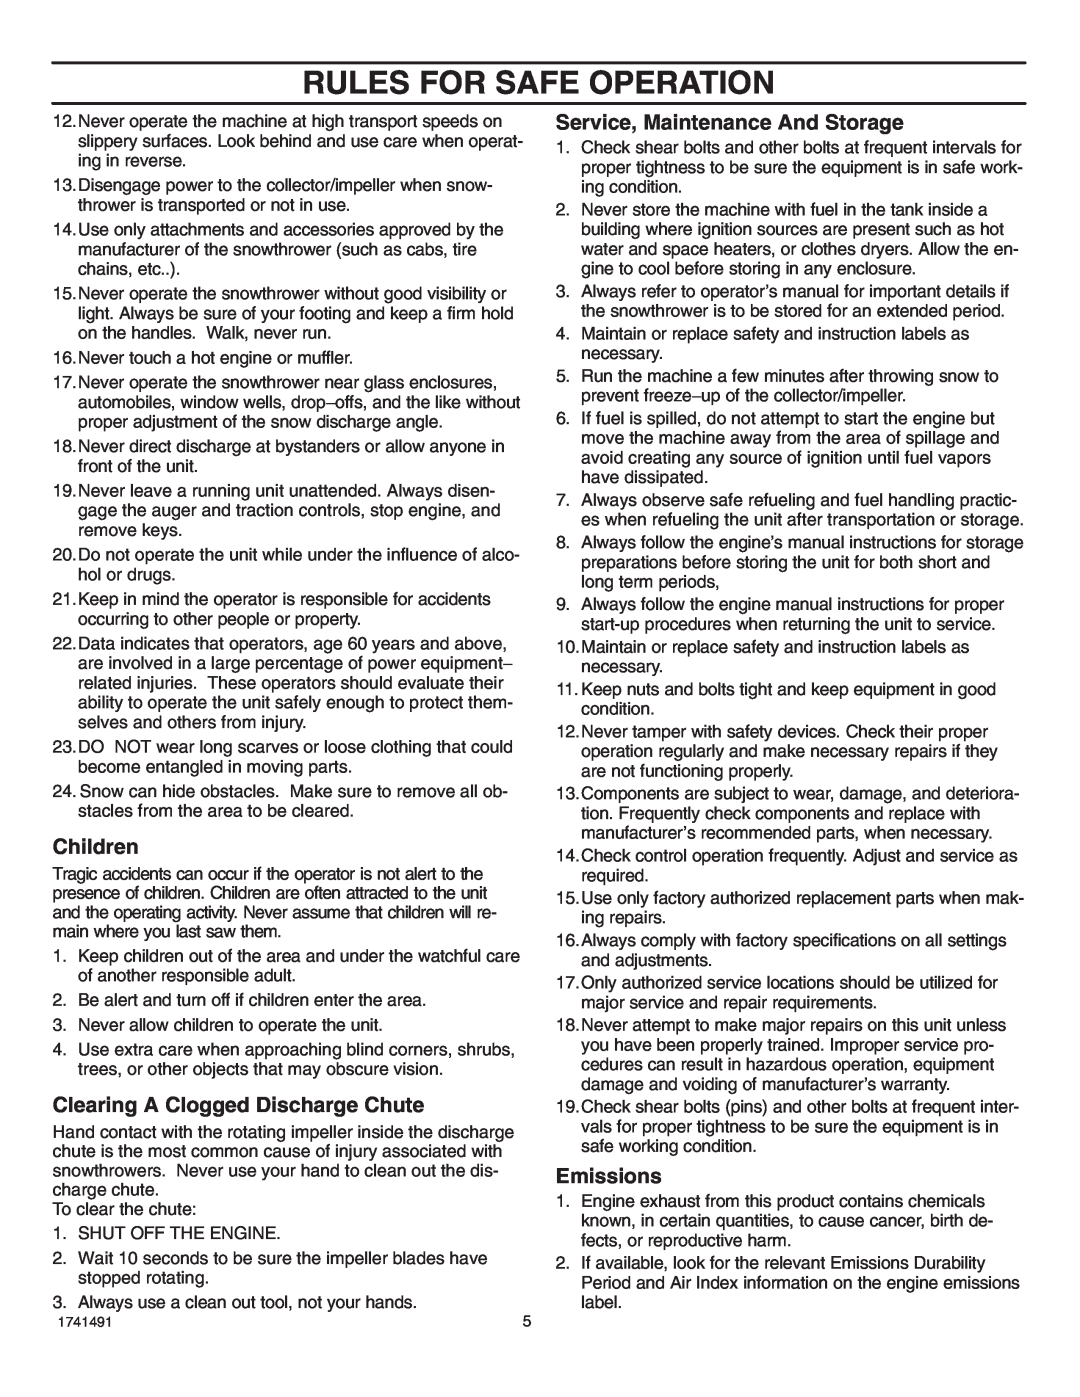 Husqvarna 5021 E Rules For Safe Operation, Children, Clearing A Clogged Discharge Chute, Service, Maintenance And Storage 